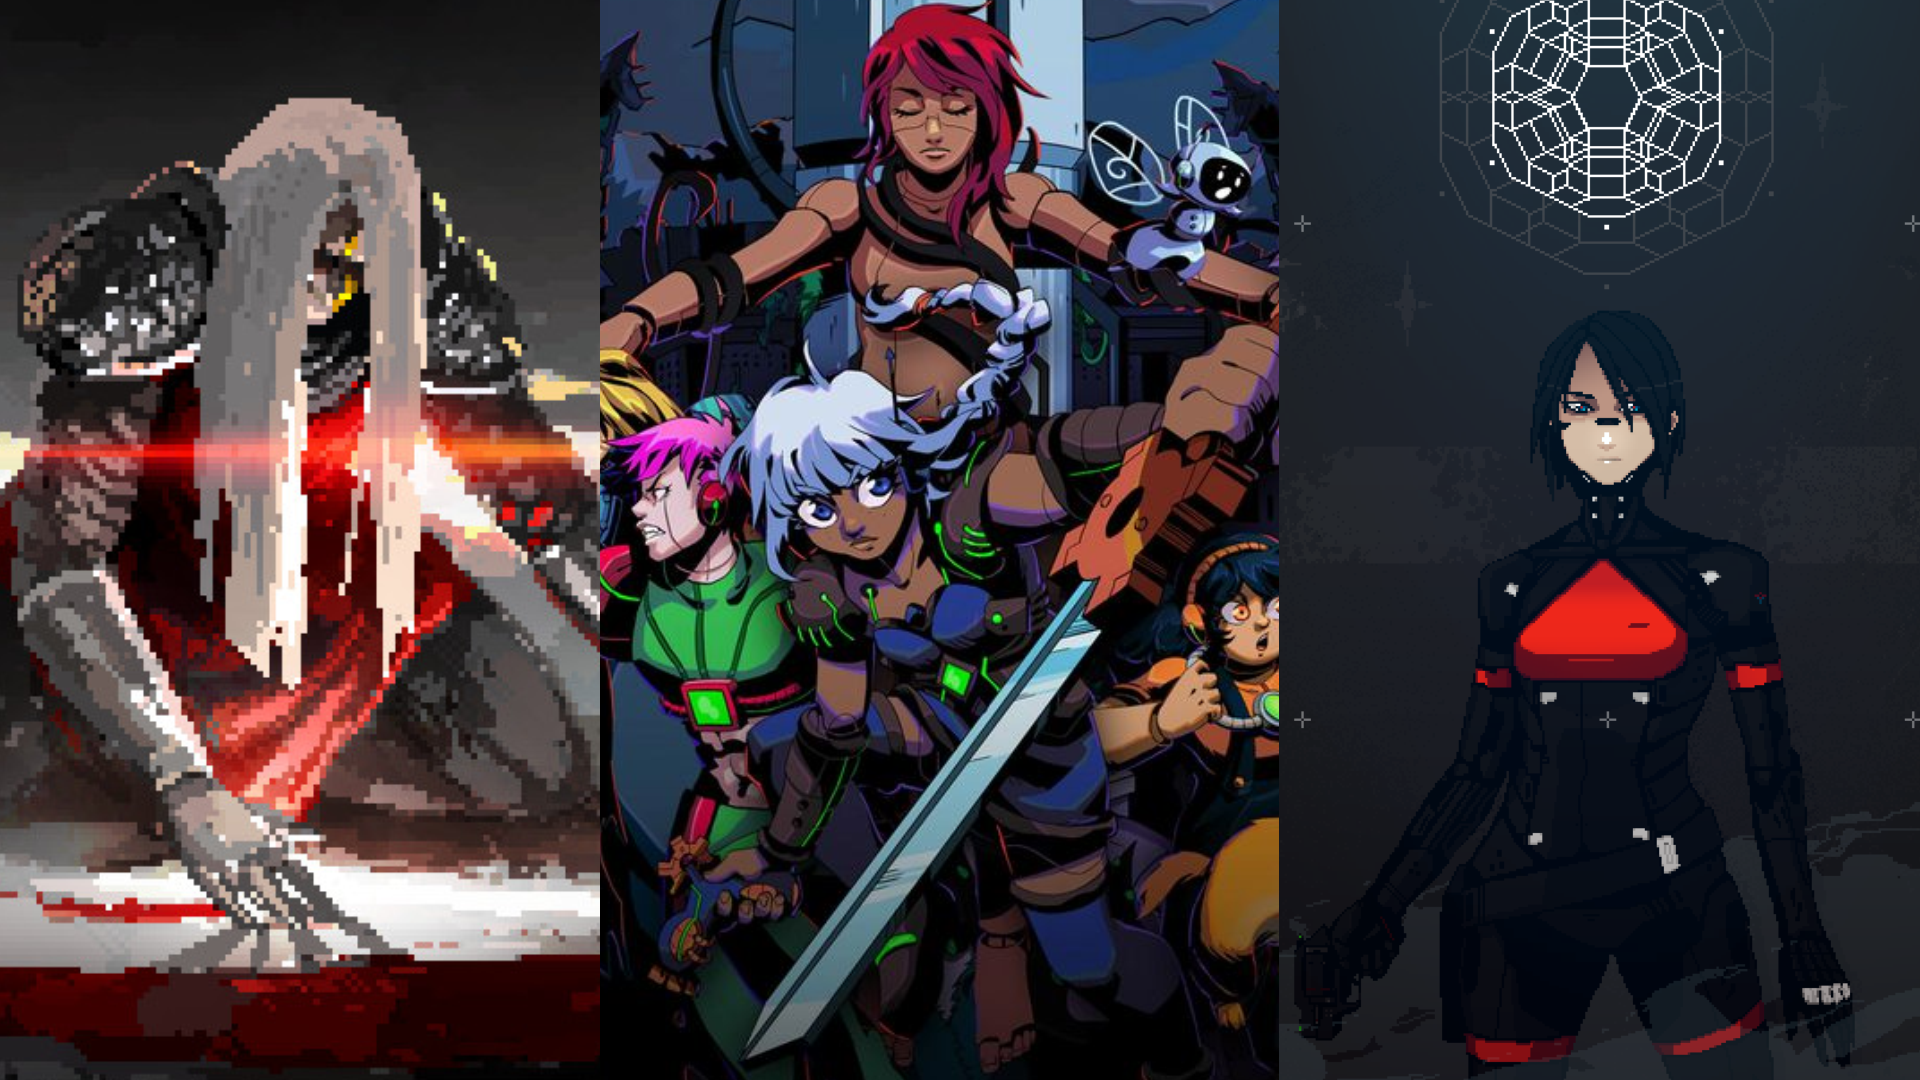 Humble Bundle Launches ‘Awesome Indies from Humble Games’ Featuring 11 Games for $14